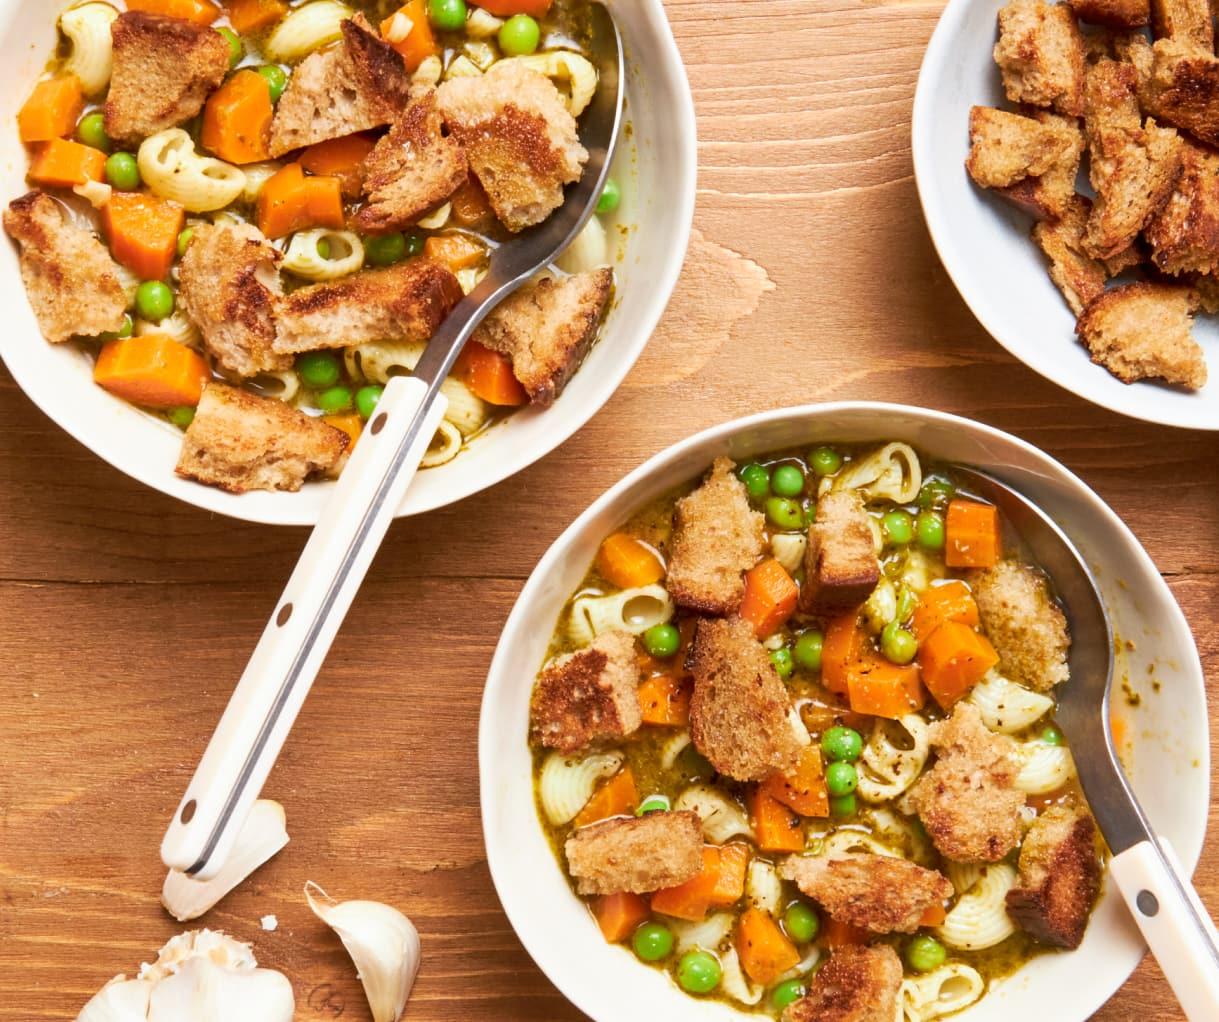 5 Balanced Fall Meals to Cook This Week